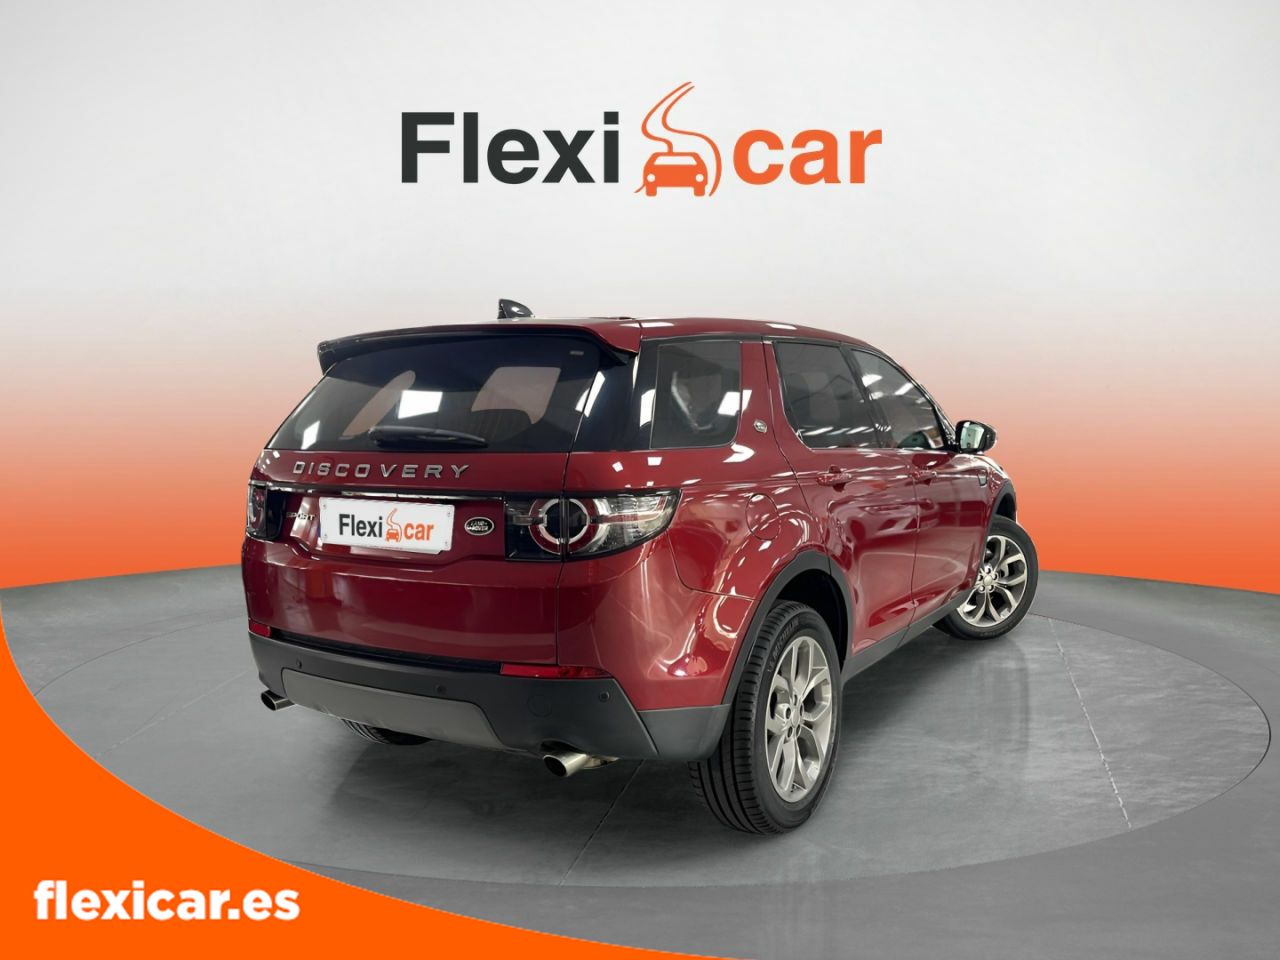 Foto Land-Rover Discovery Sport 9